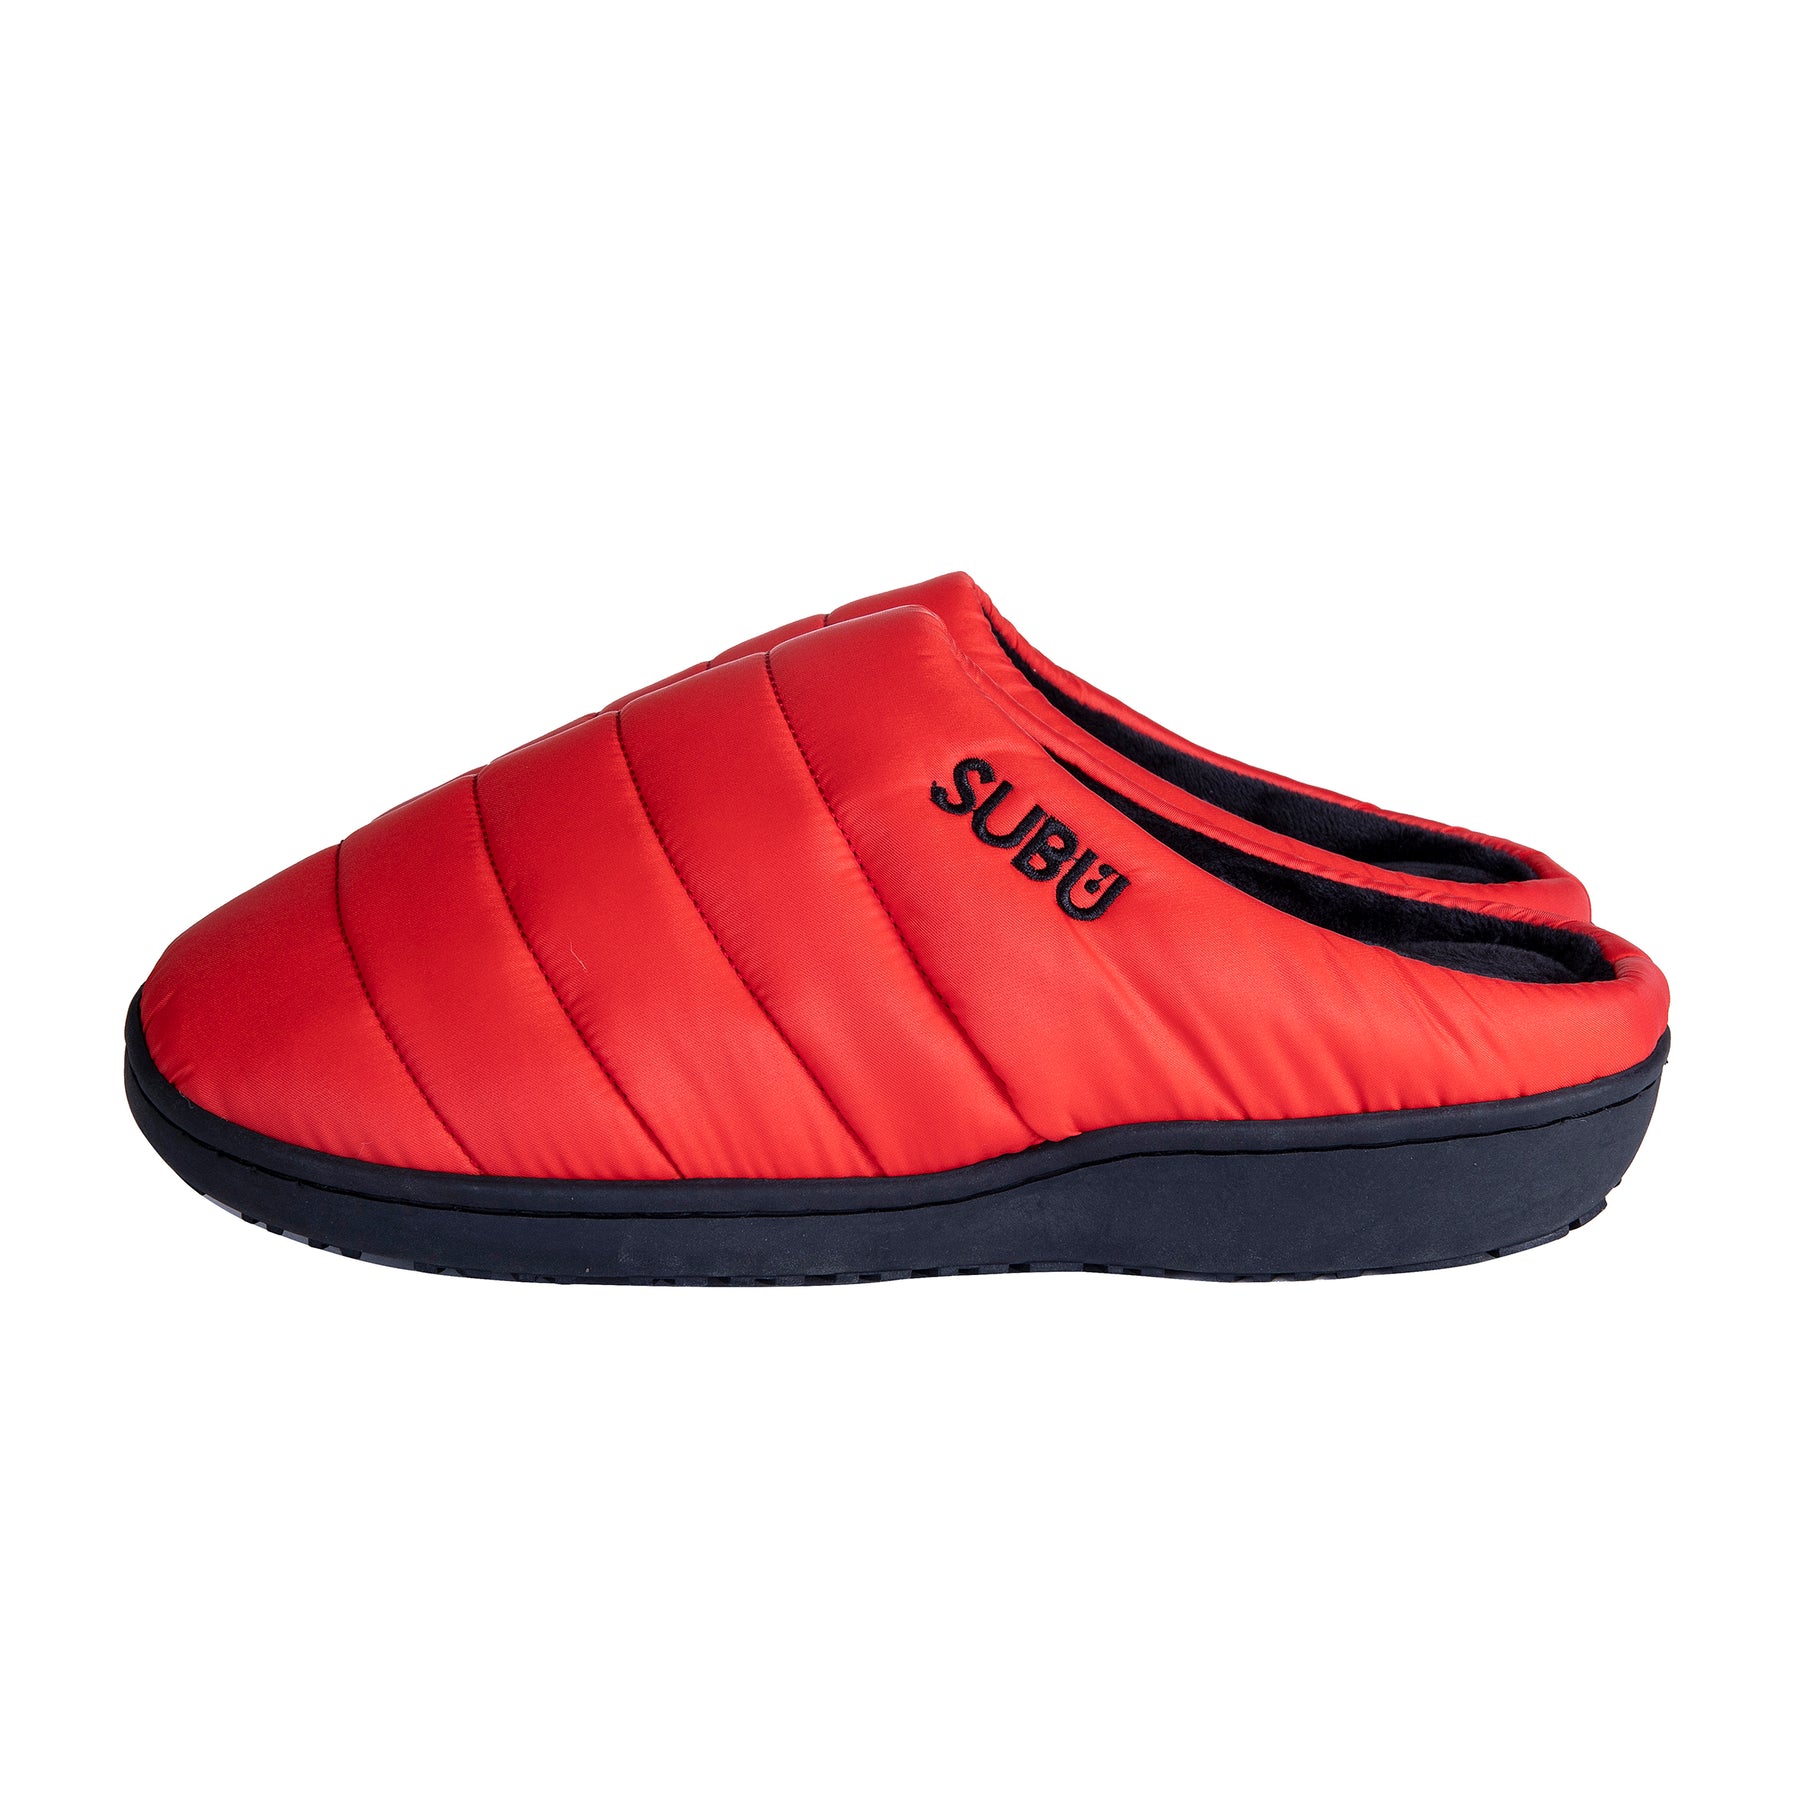 AMEICO - Official US Distributor of SUBU - Fall & Winter Slippers - Red